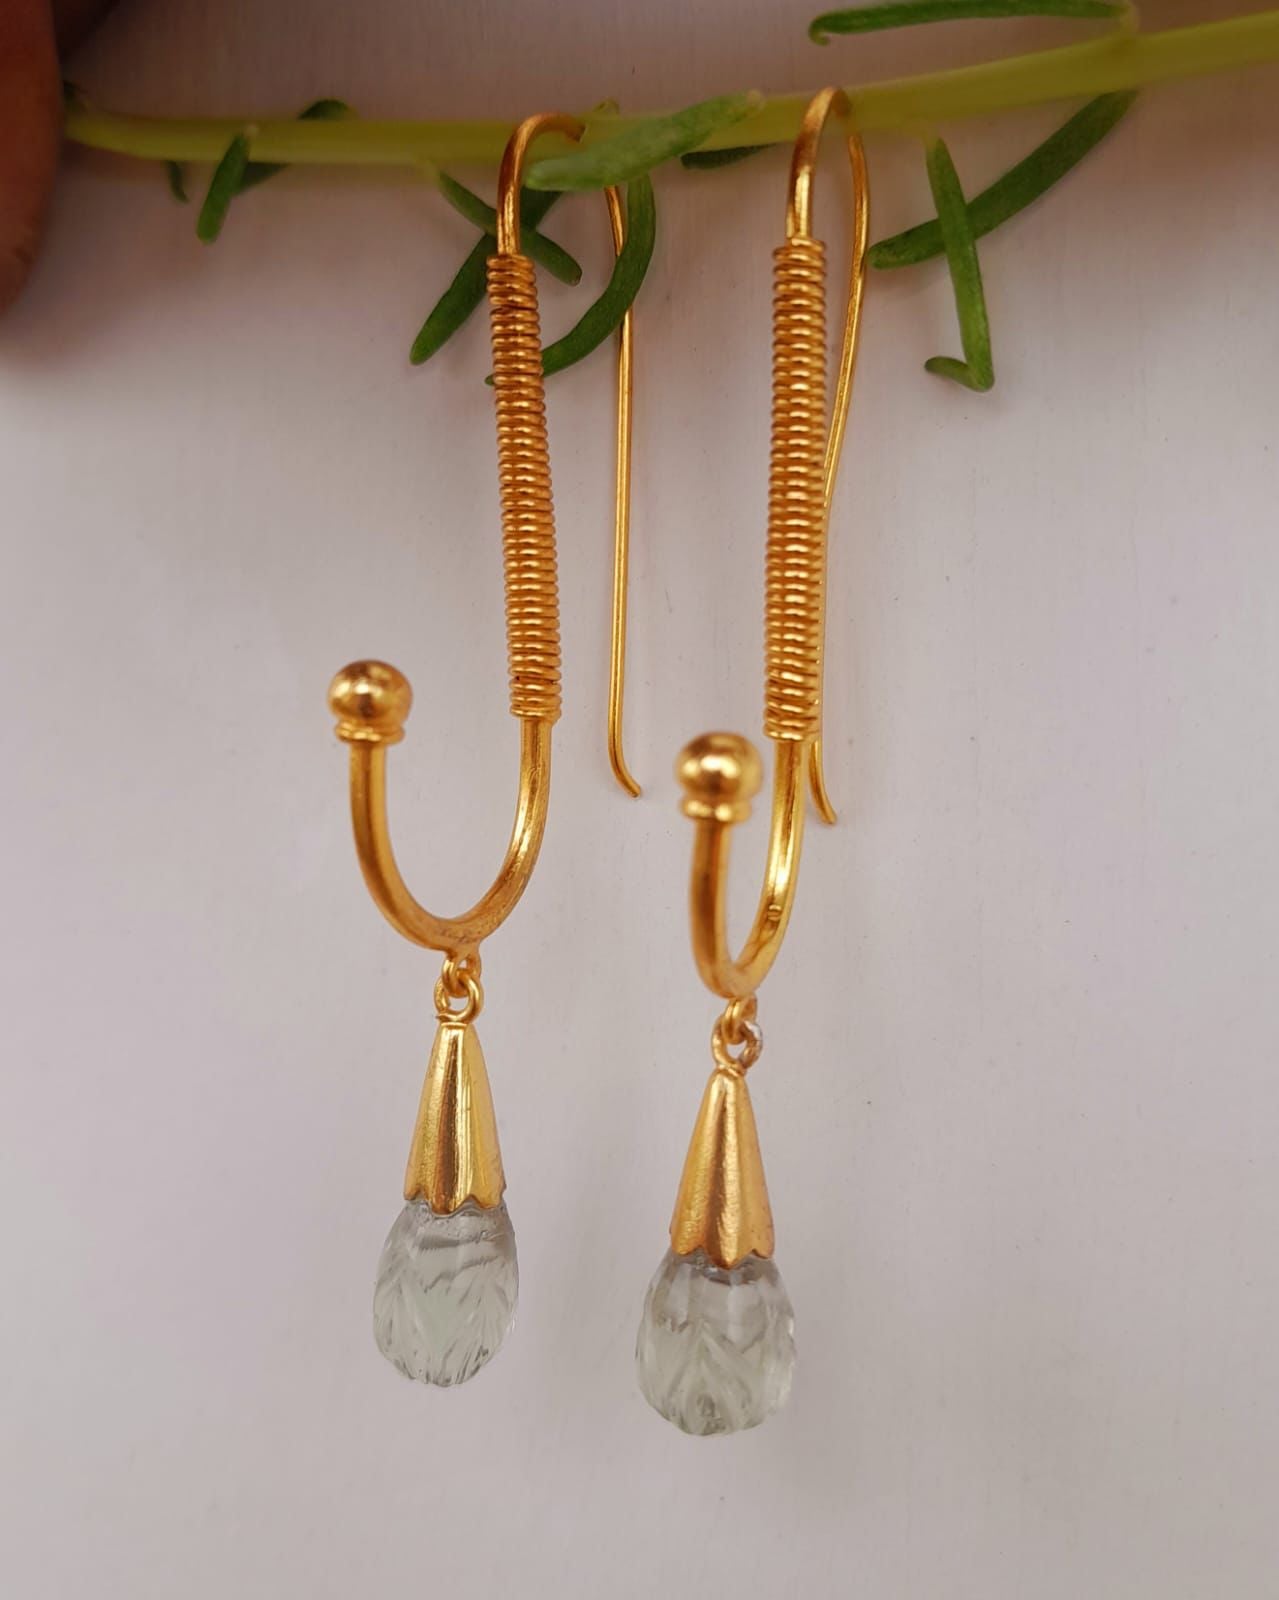 Handcrafted silver,

1 micron gold plating hook earrings,

Carved green amethyst.